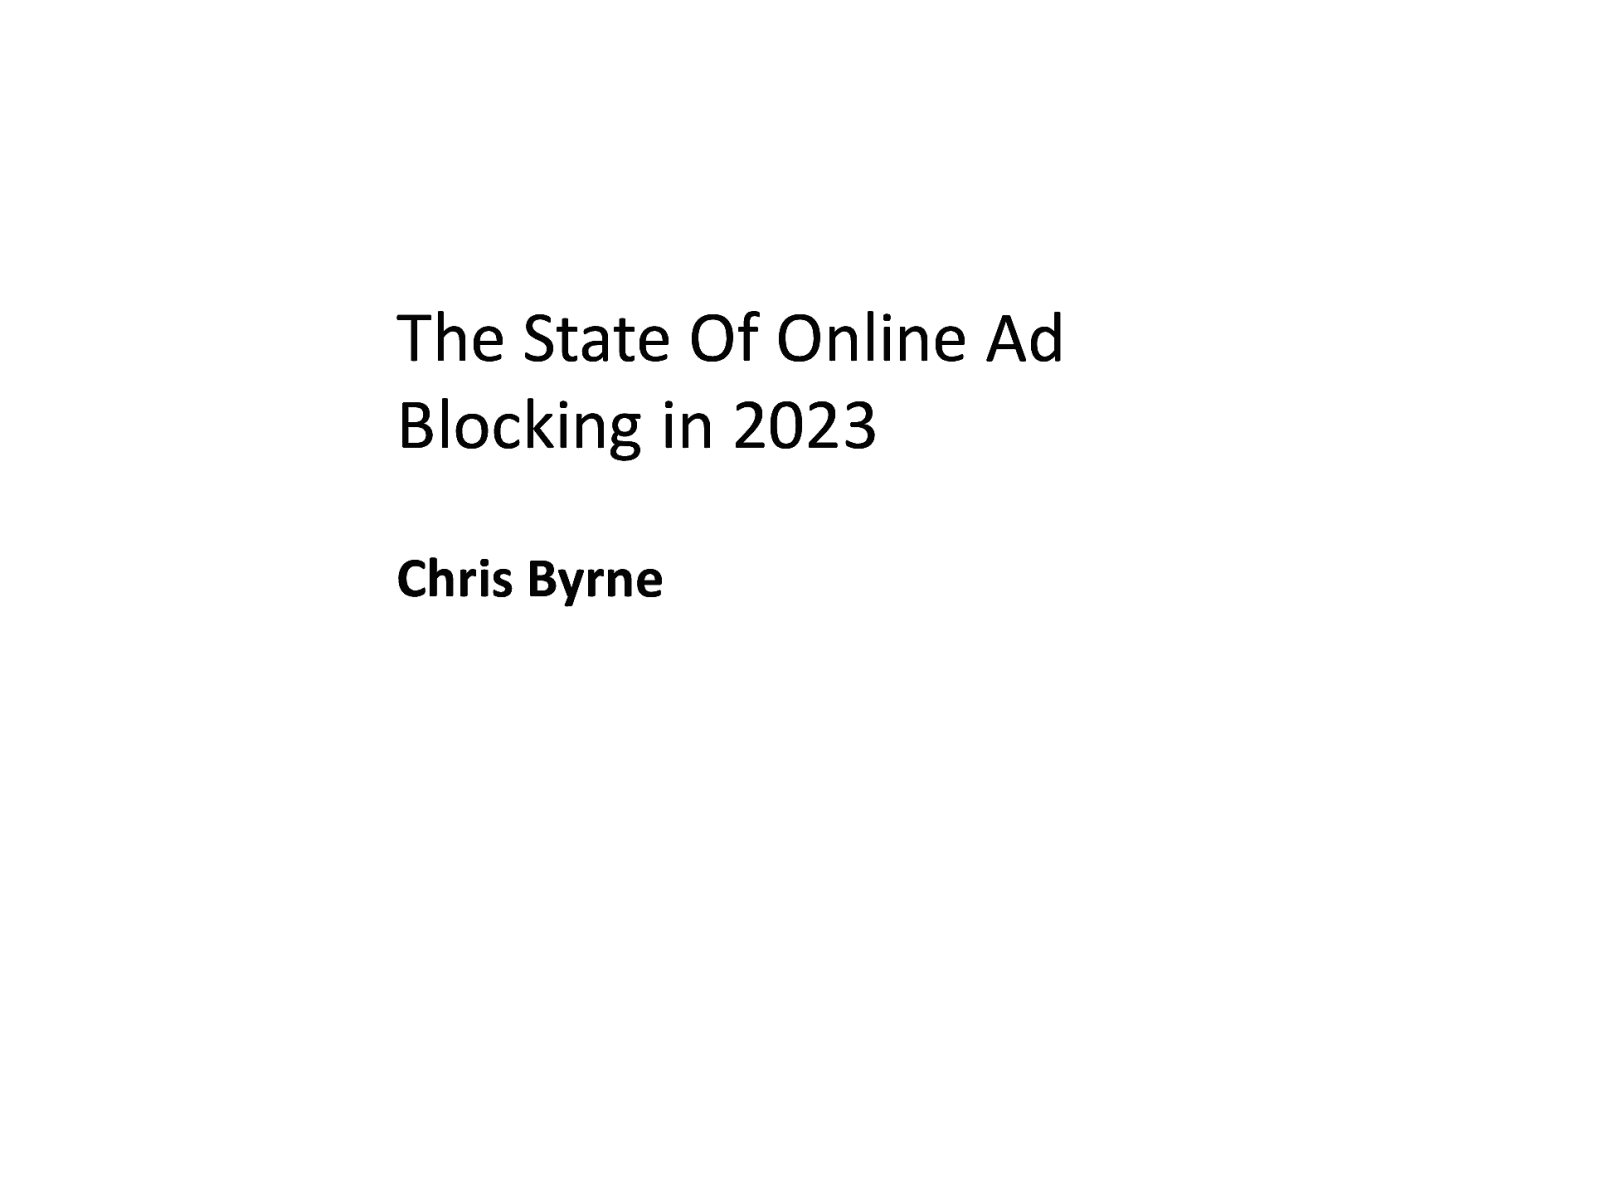 Presentation on Online Ad Blocking in the UK